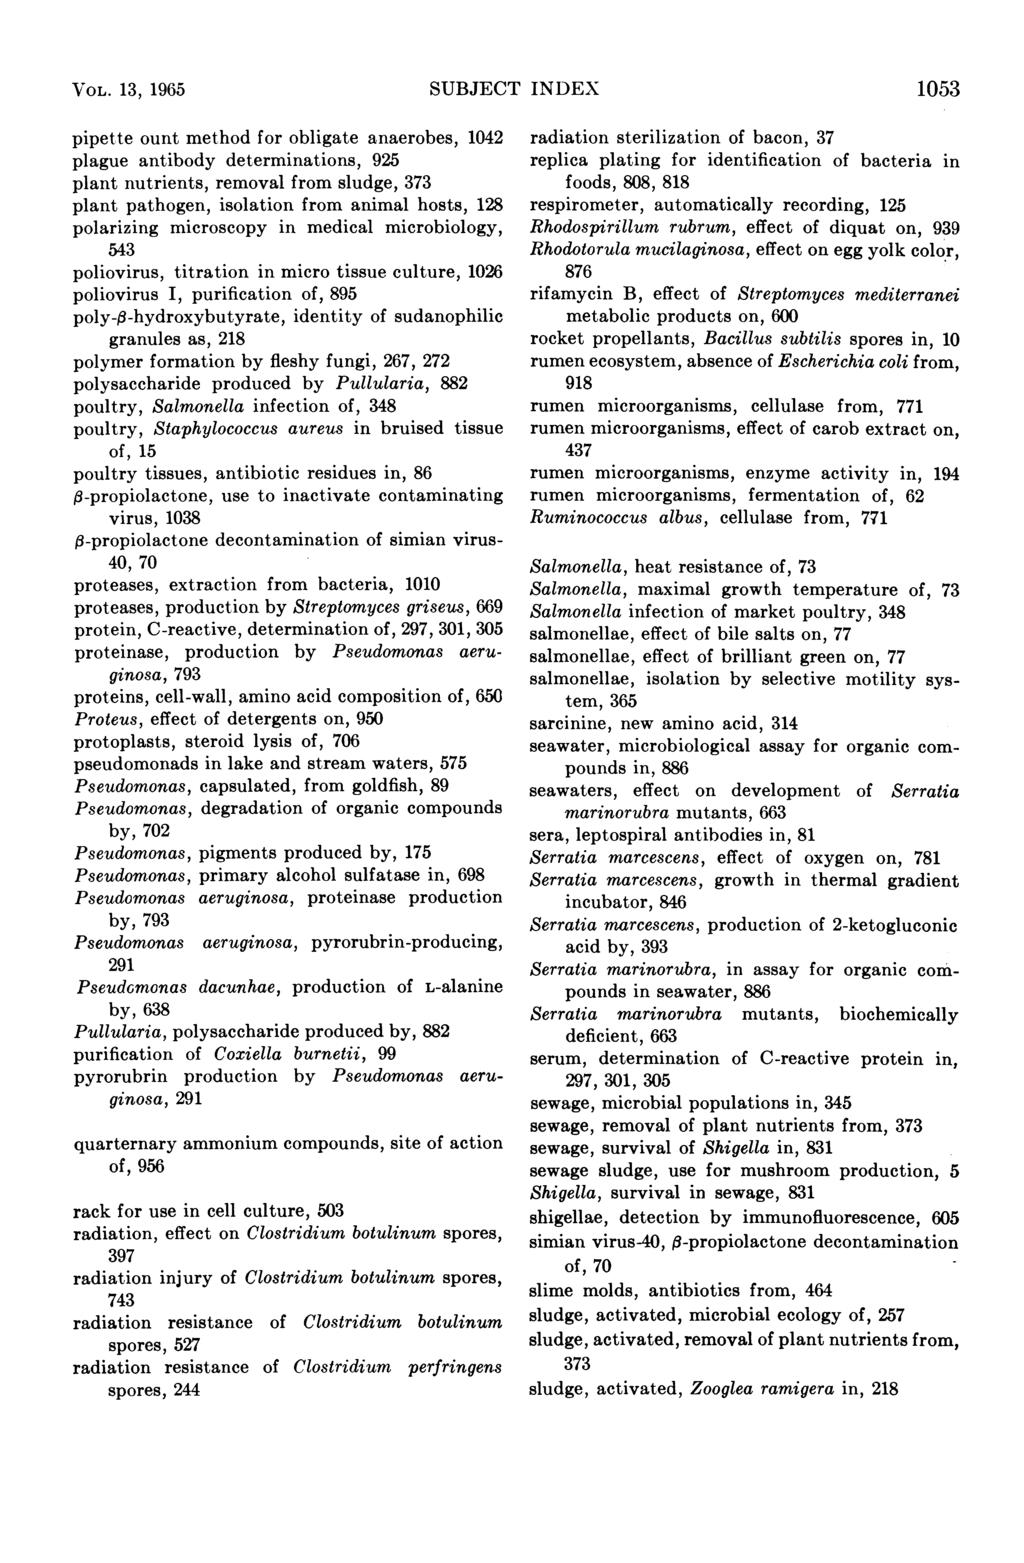 VOL. 13, 1965 SUBJECT INDEX 1053 pipette ount method for obligate anaerobes, 1042 plague antibody determinations, 925 plant nutrients, removal from sludge, 373 plant pathogen, isolation from animal